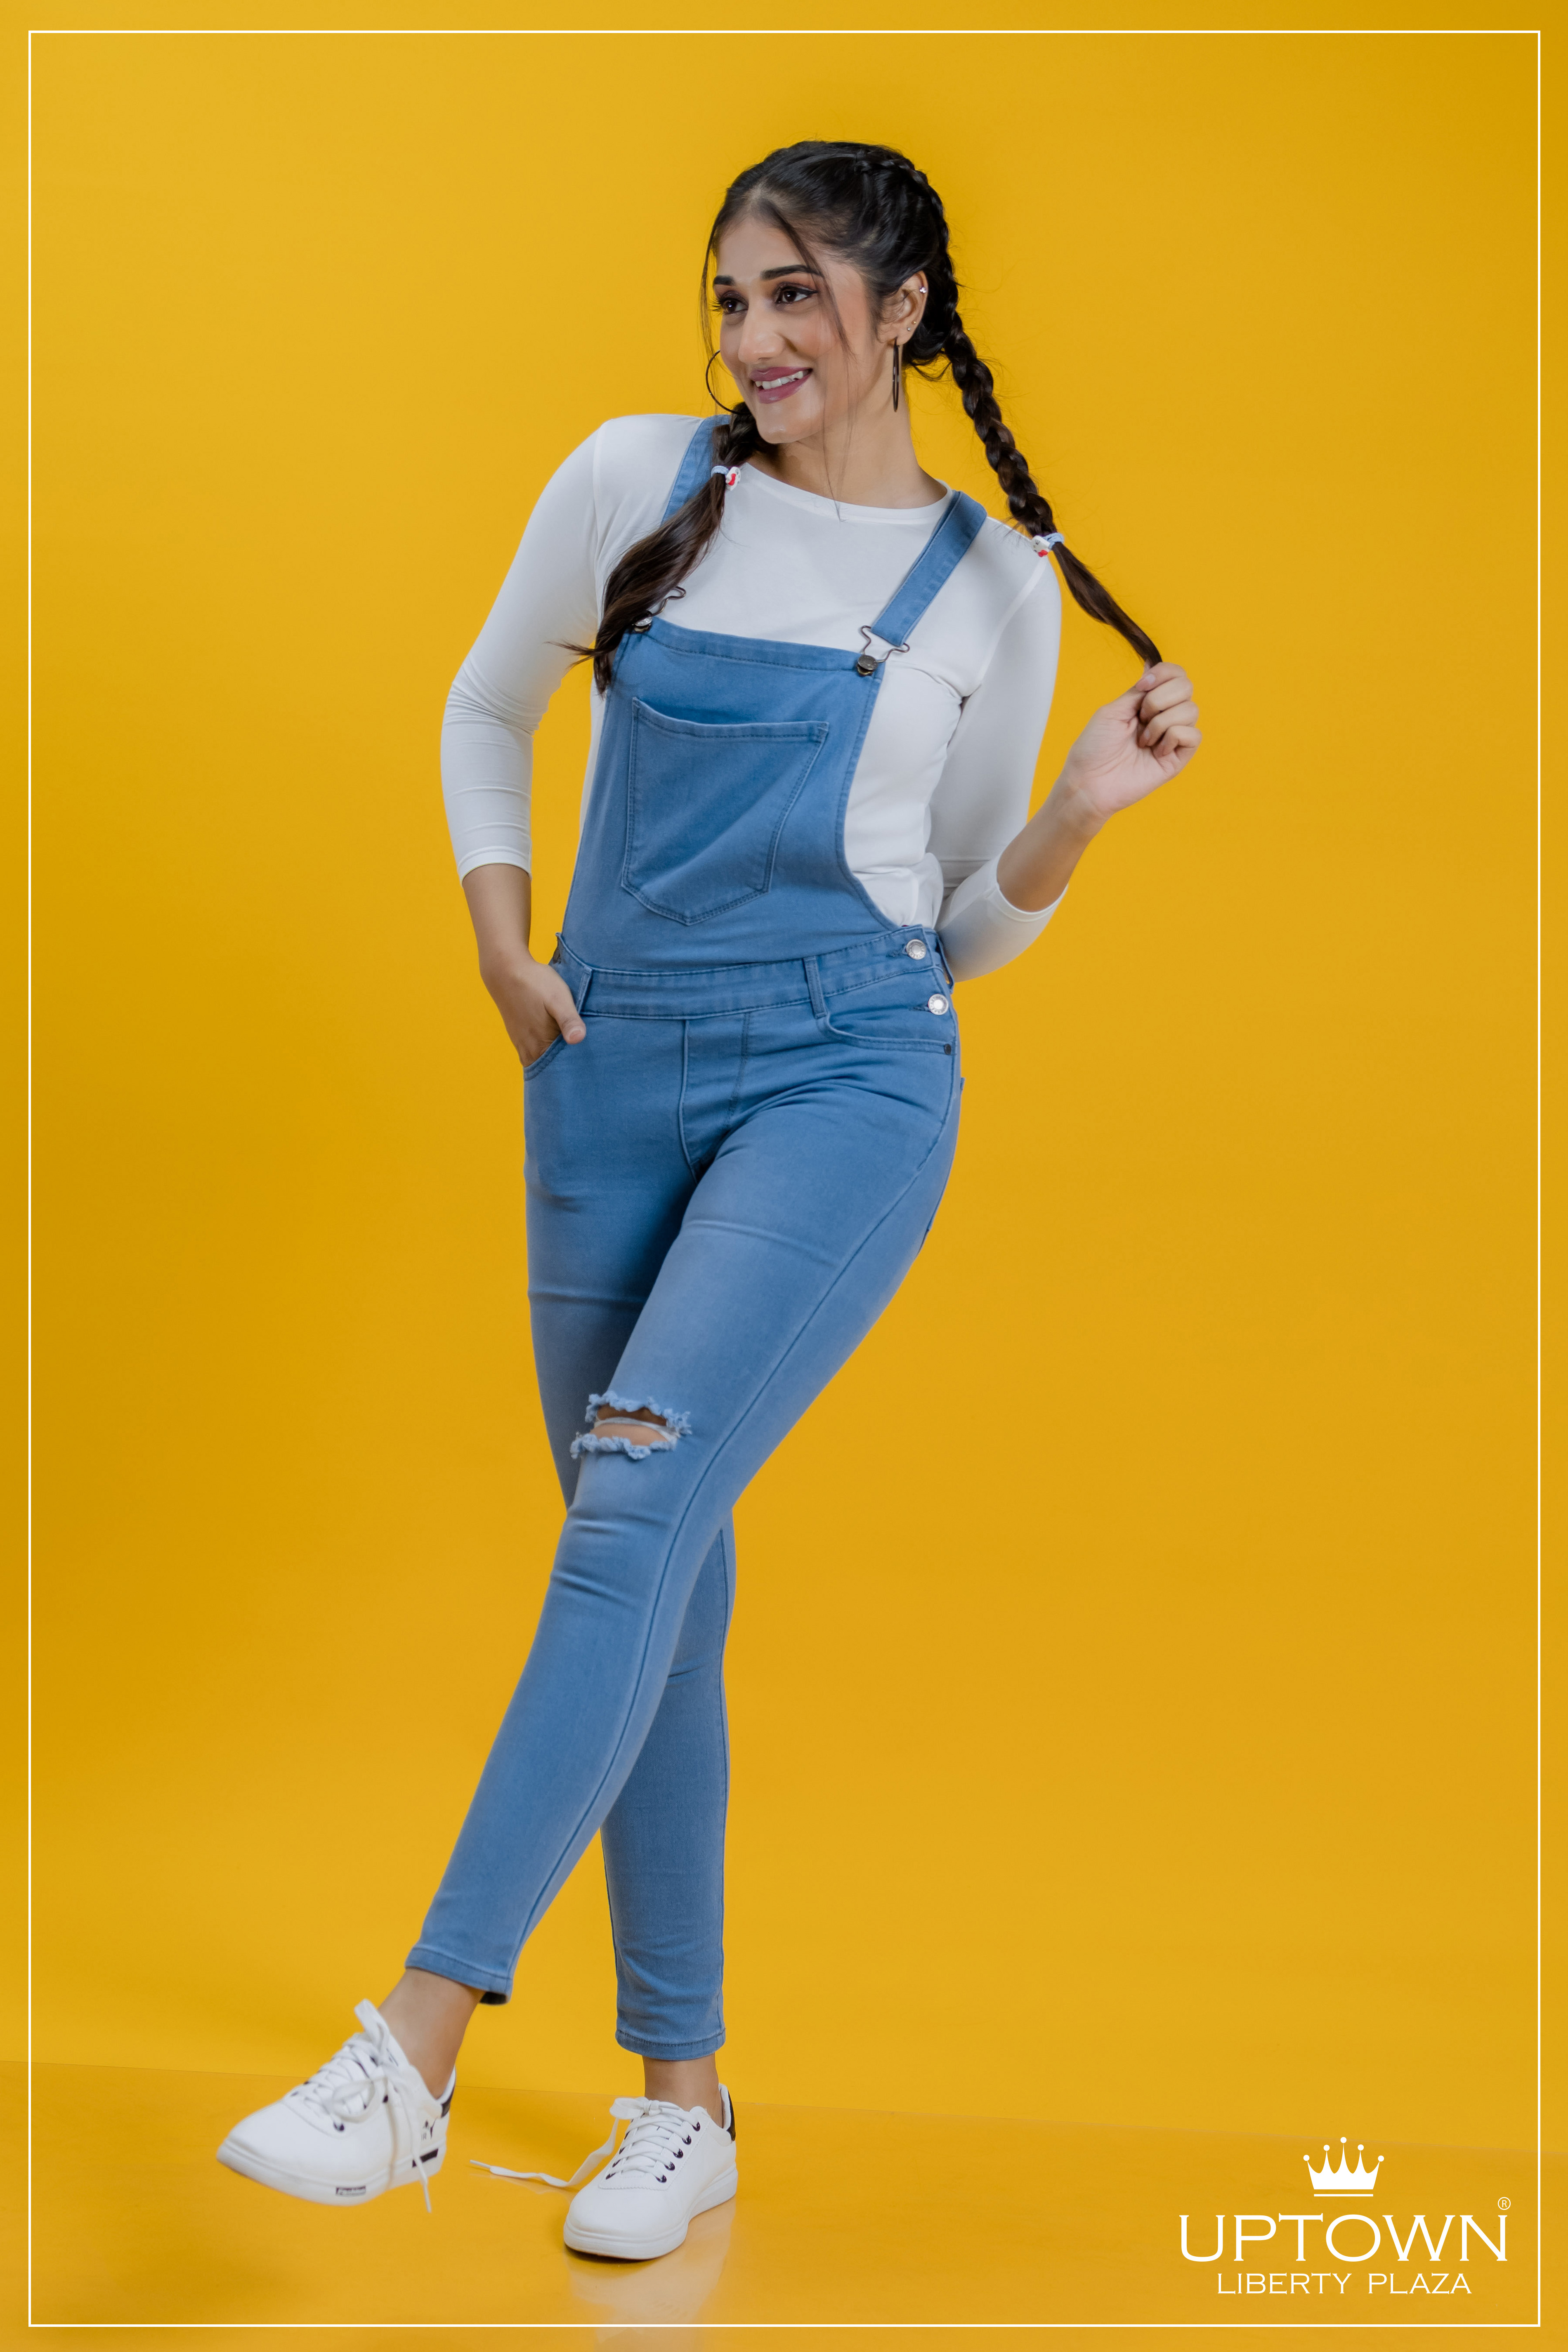 Share more than 176 denim dungaree jeans